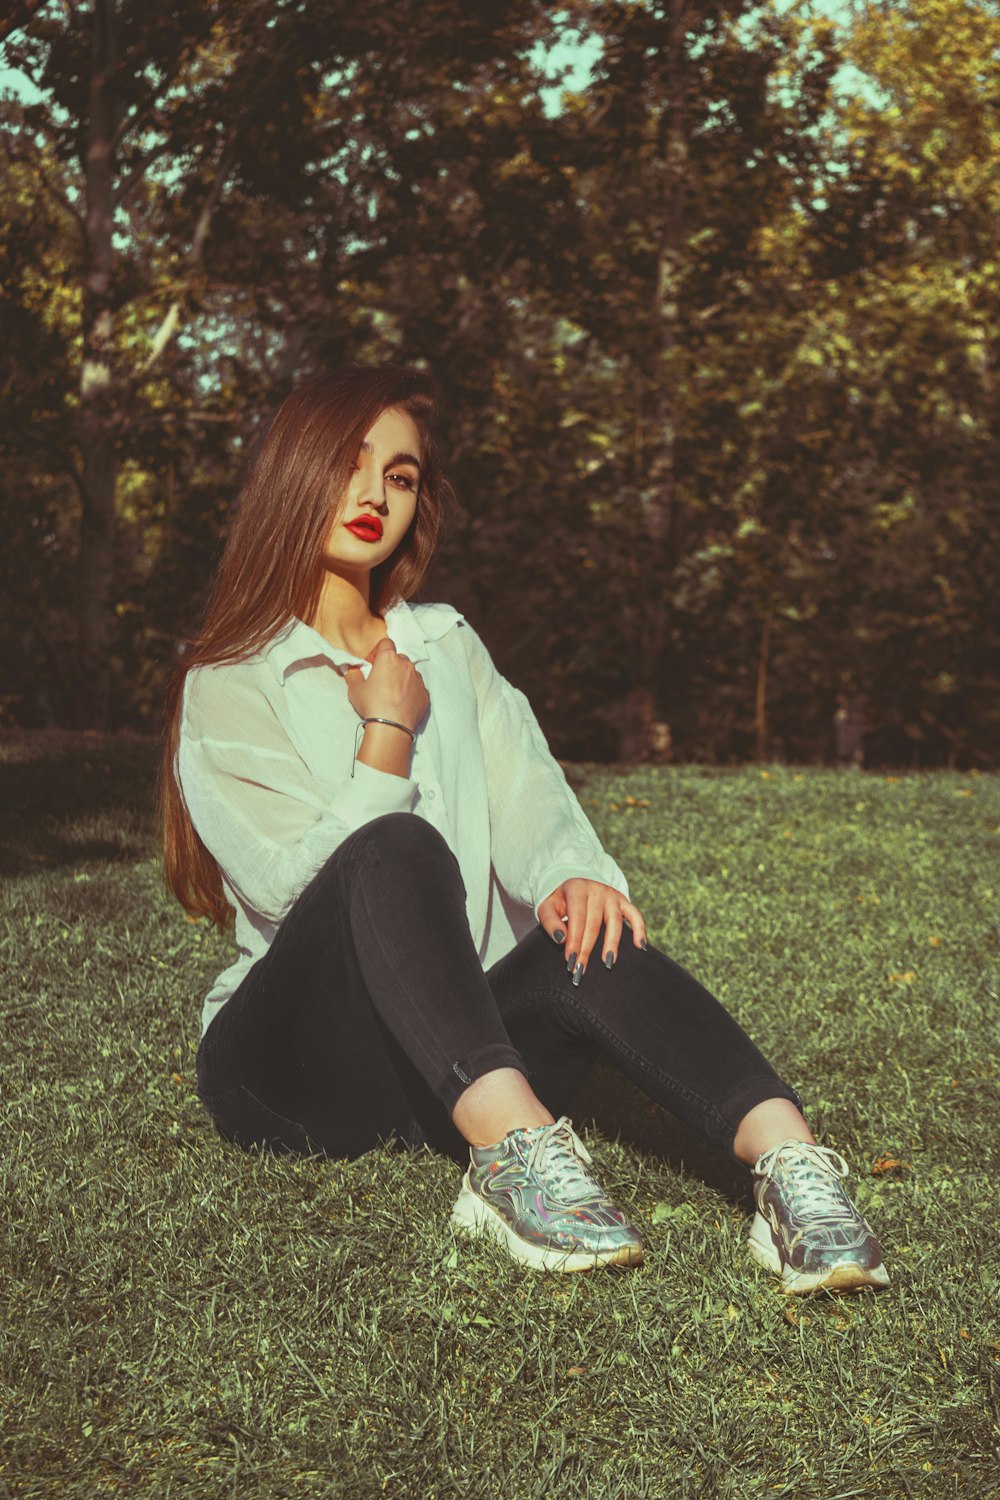 woman in white long sleeve shirt and black pants sitting on green grass field during daytime